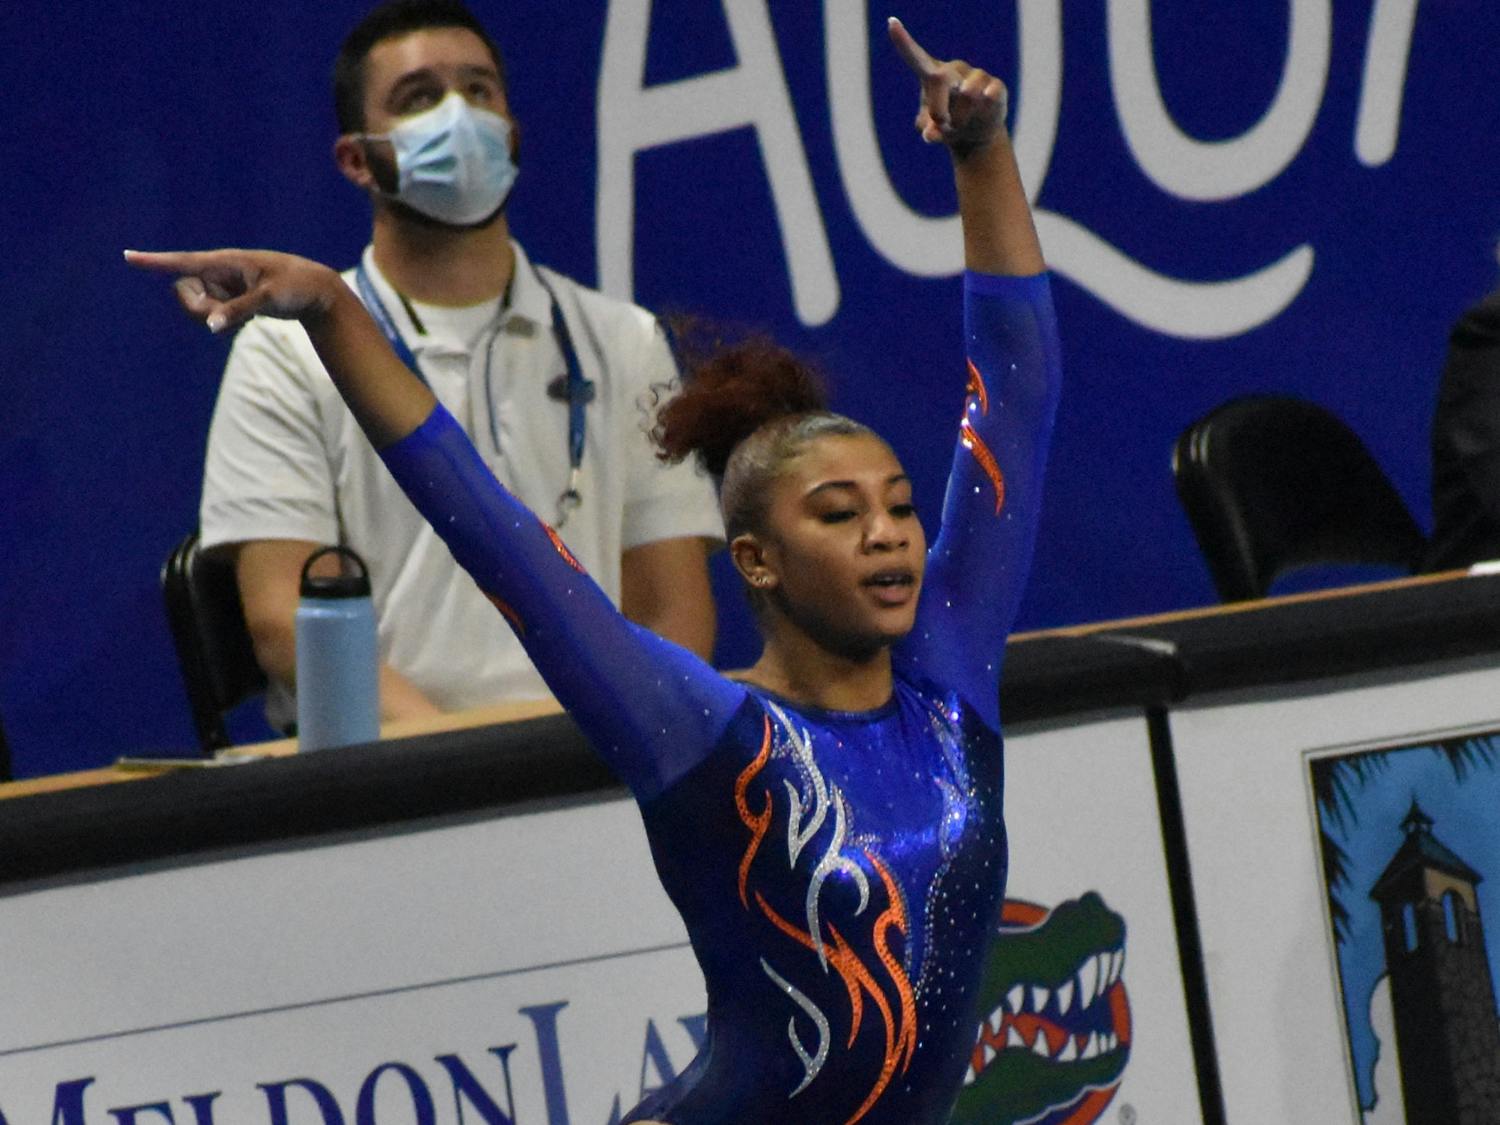 Nya Reed’s 9.95 punched her team’s ticket to the NCAA Semifinals. Photo from UF-Mizzou meet Jan. 29.